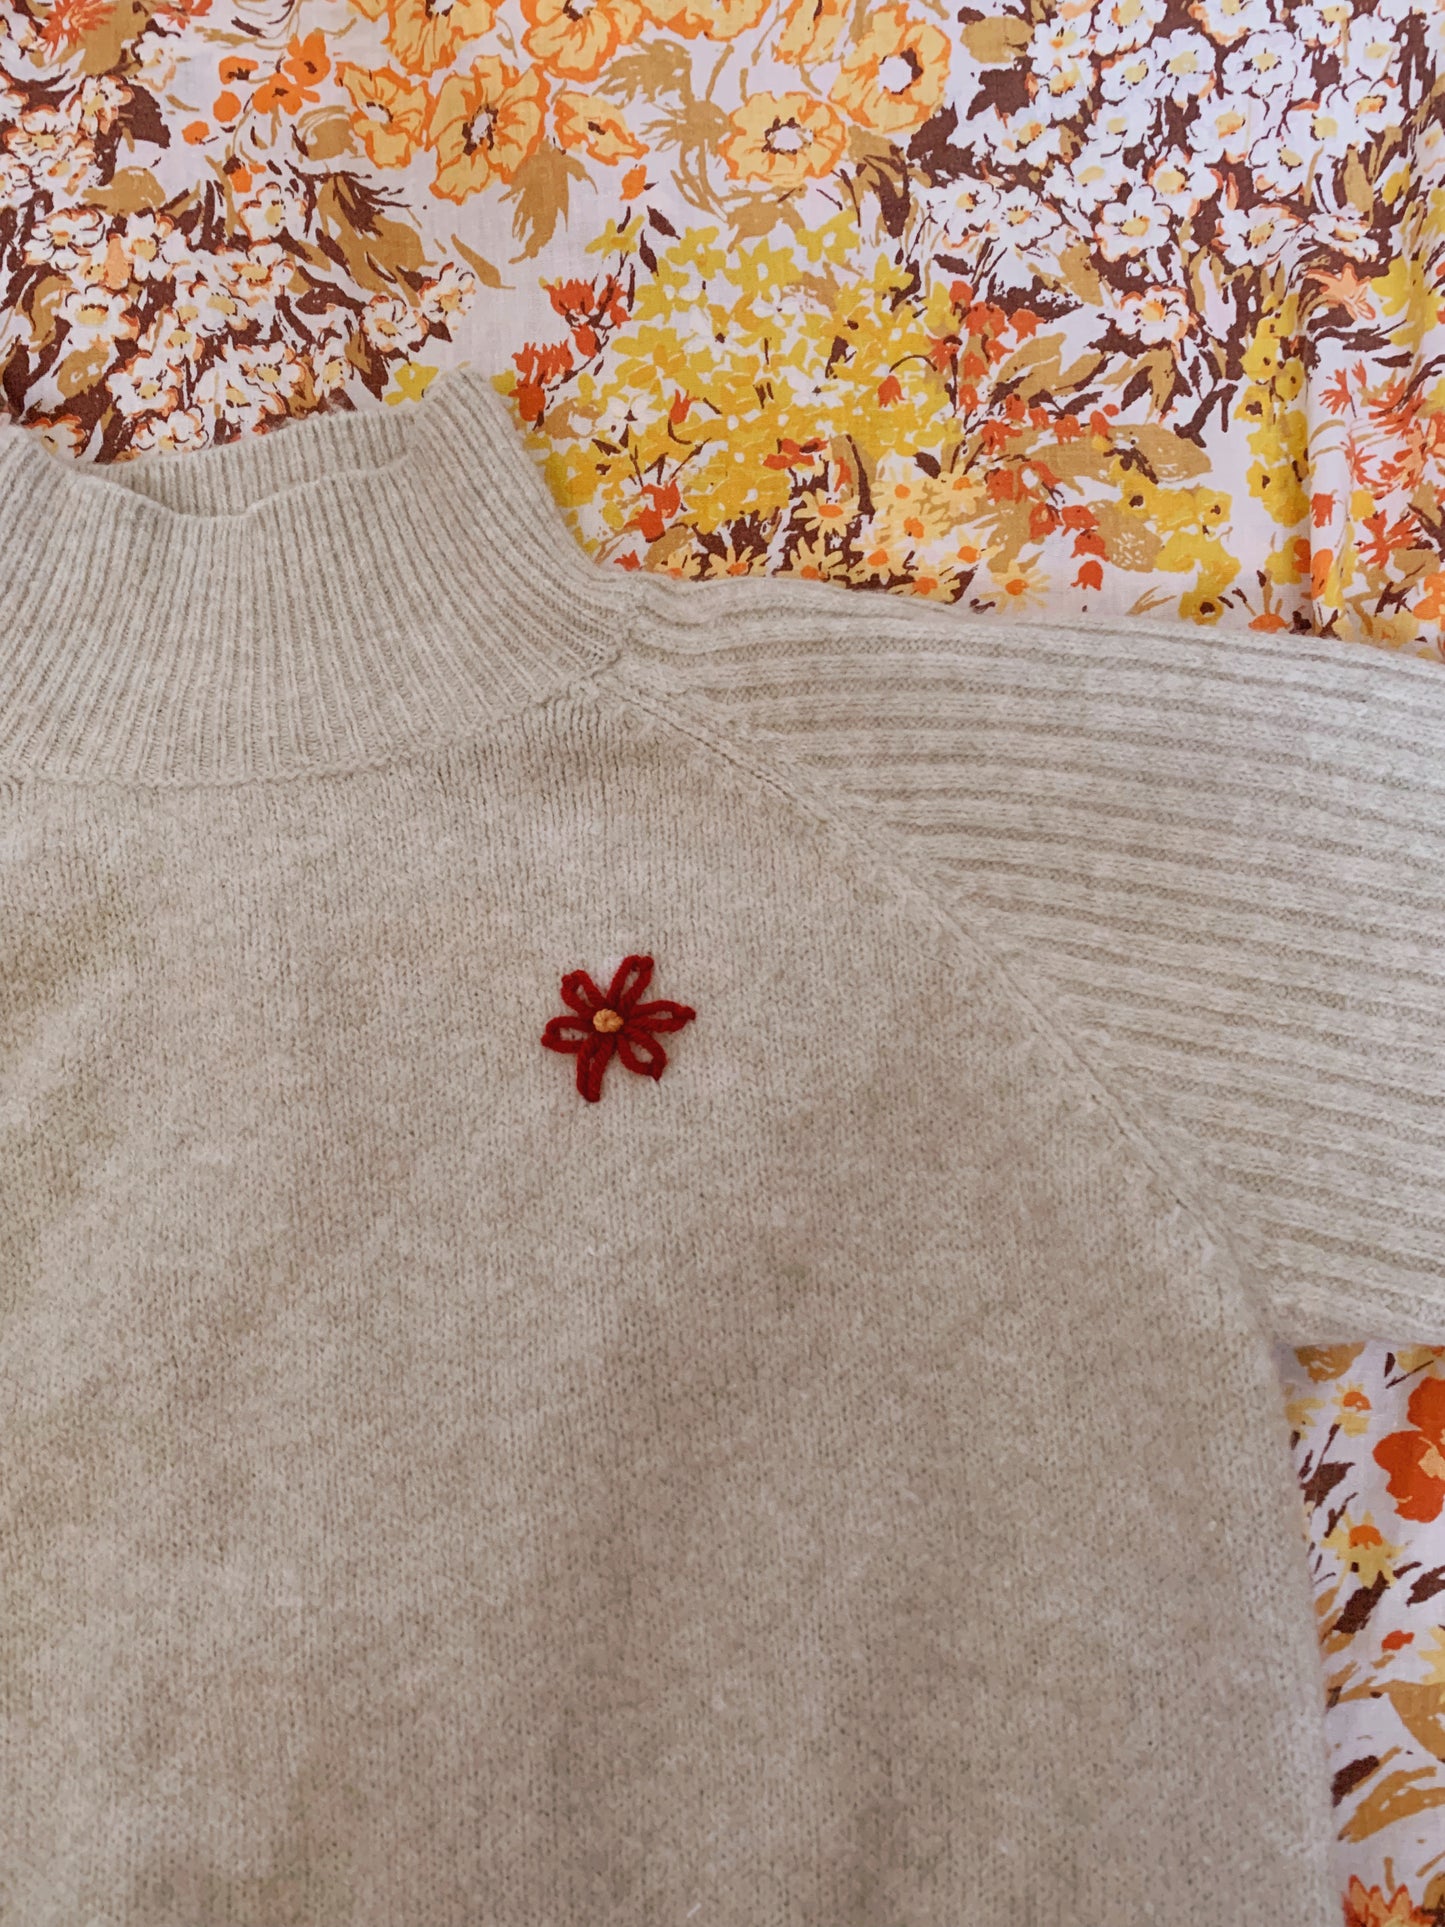 Big back flower thrifted sweater